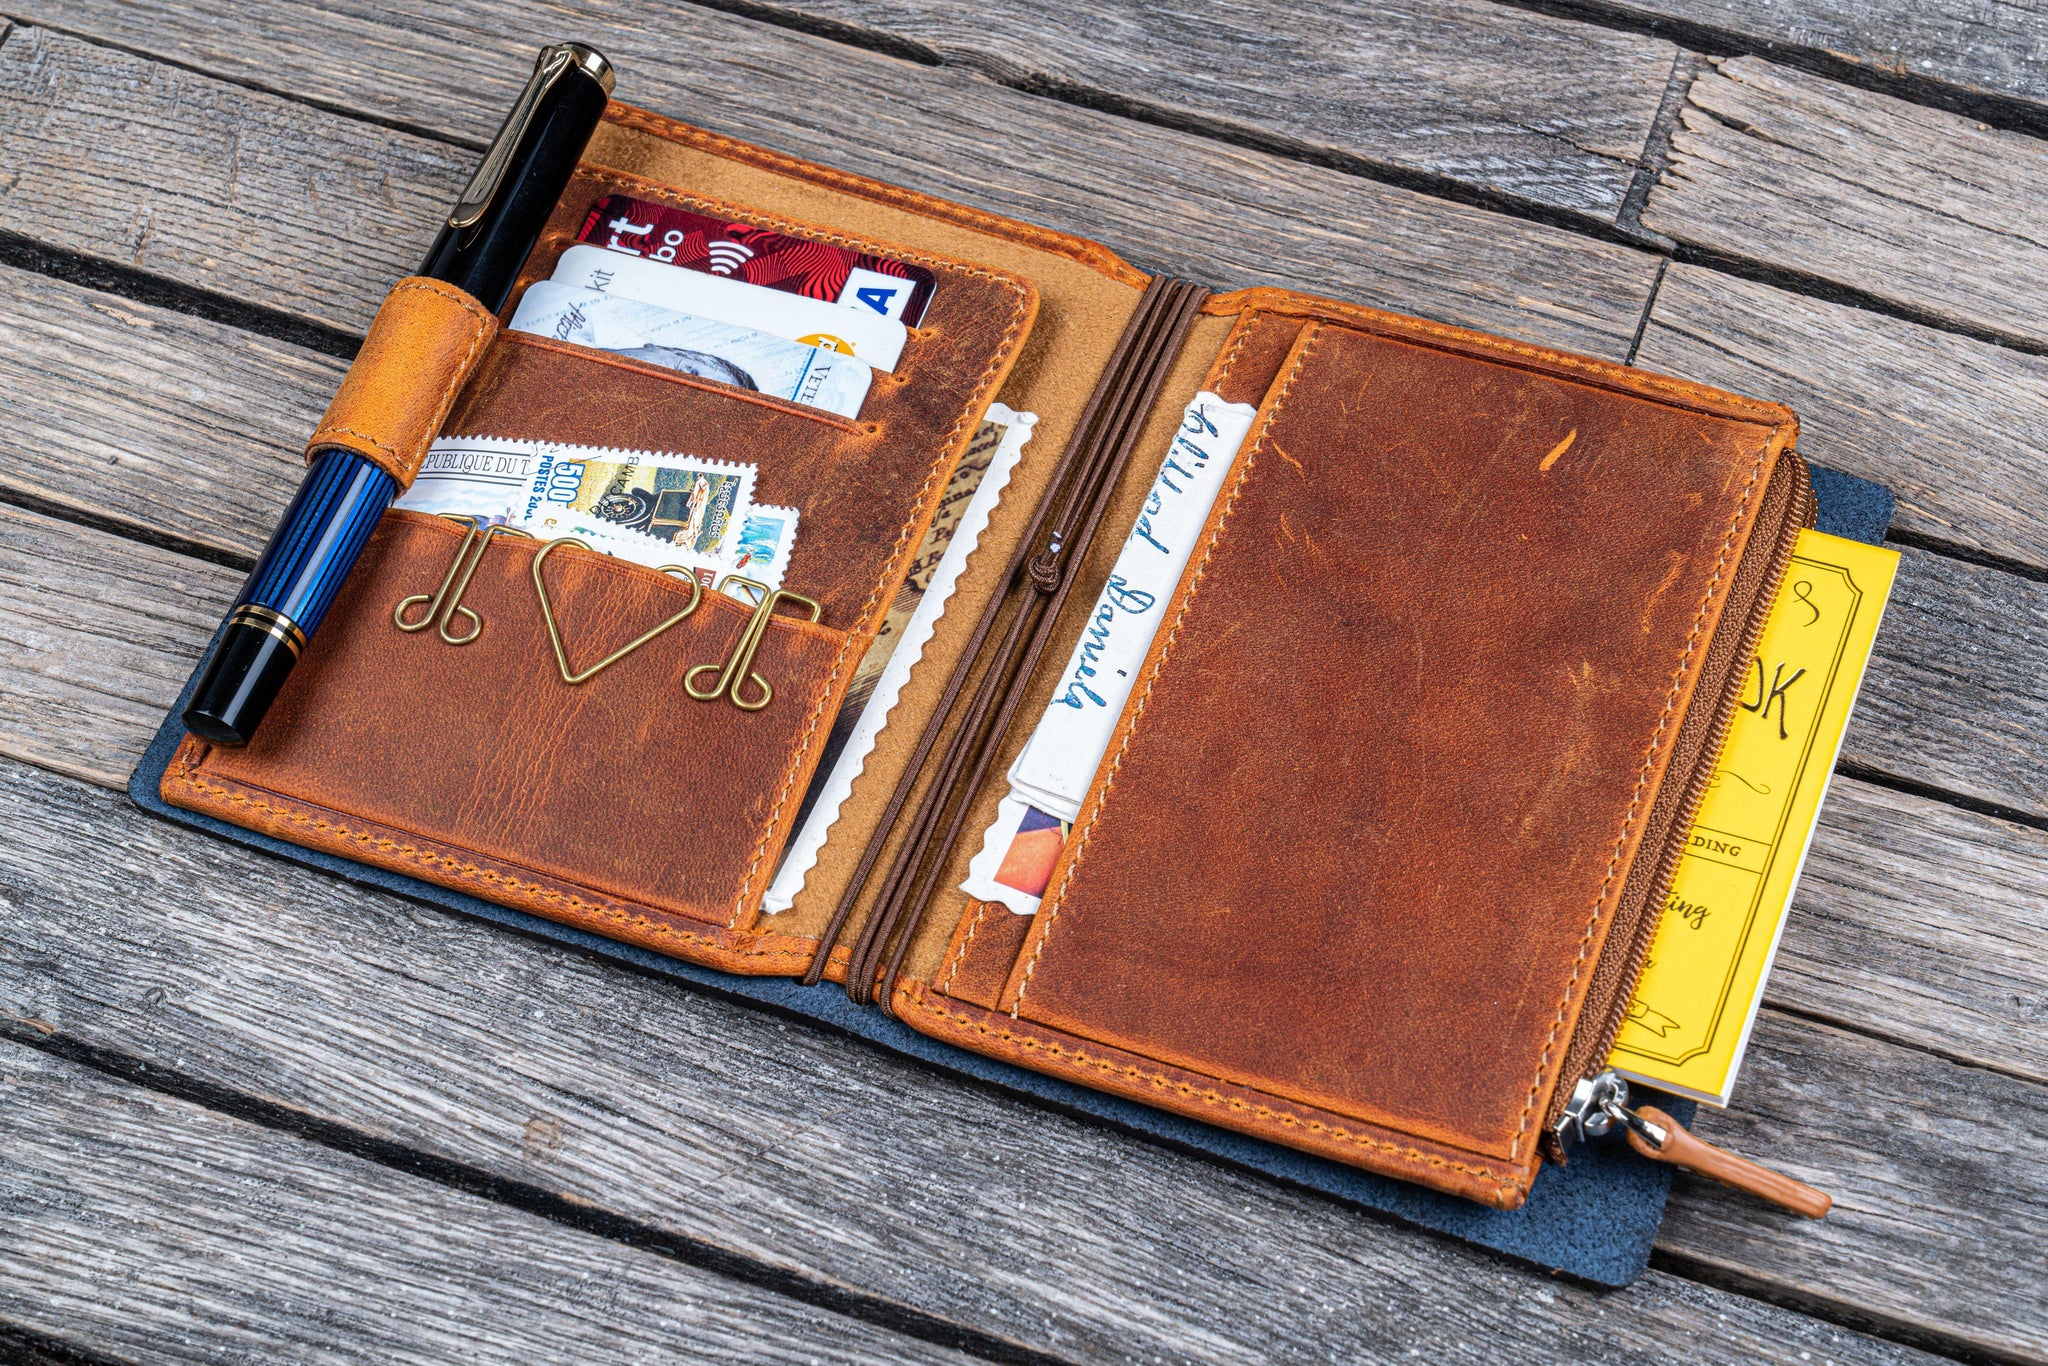 Galen Leather Notebook - Crazy Horse Brown - B6